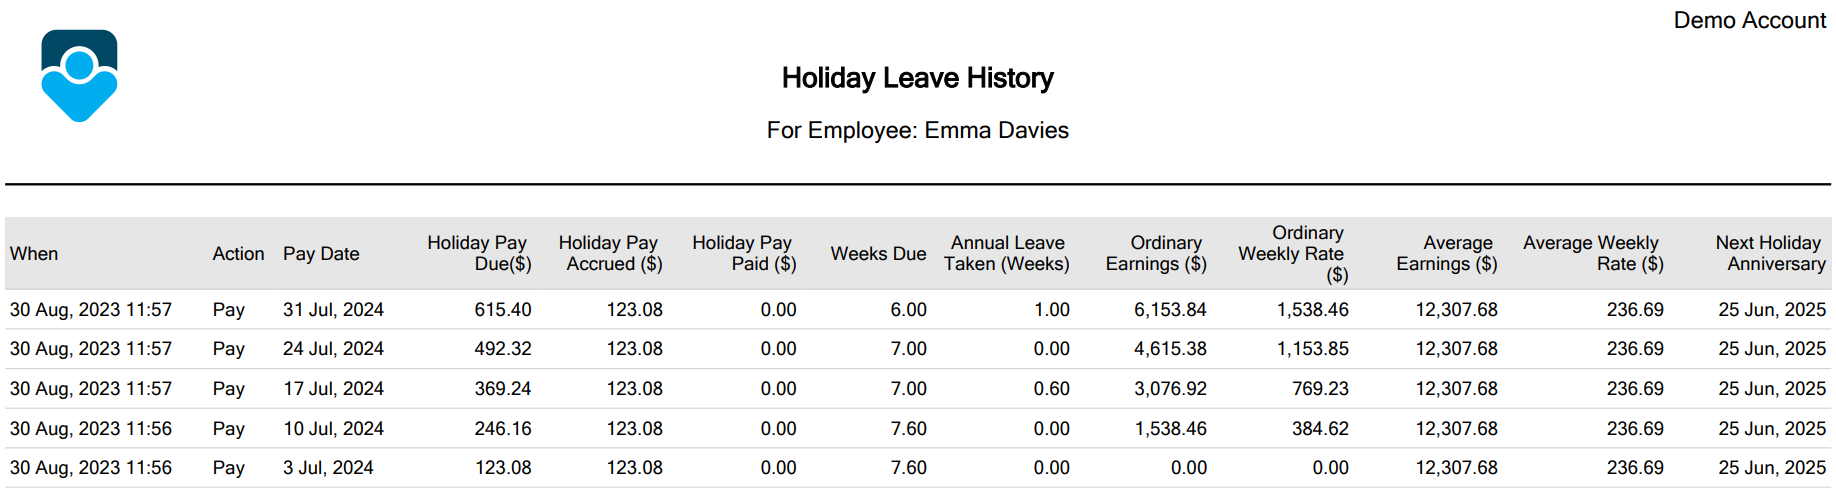 Holiday Leave History Report.png